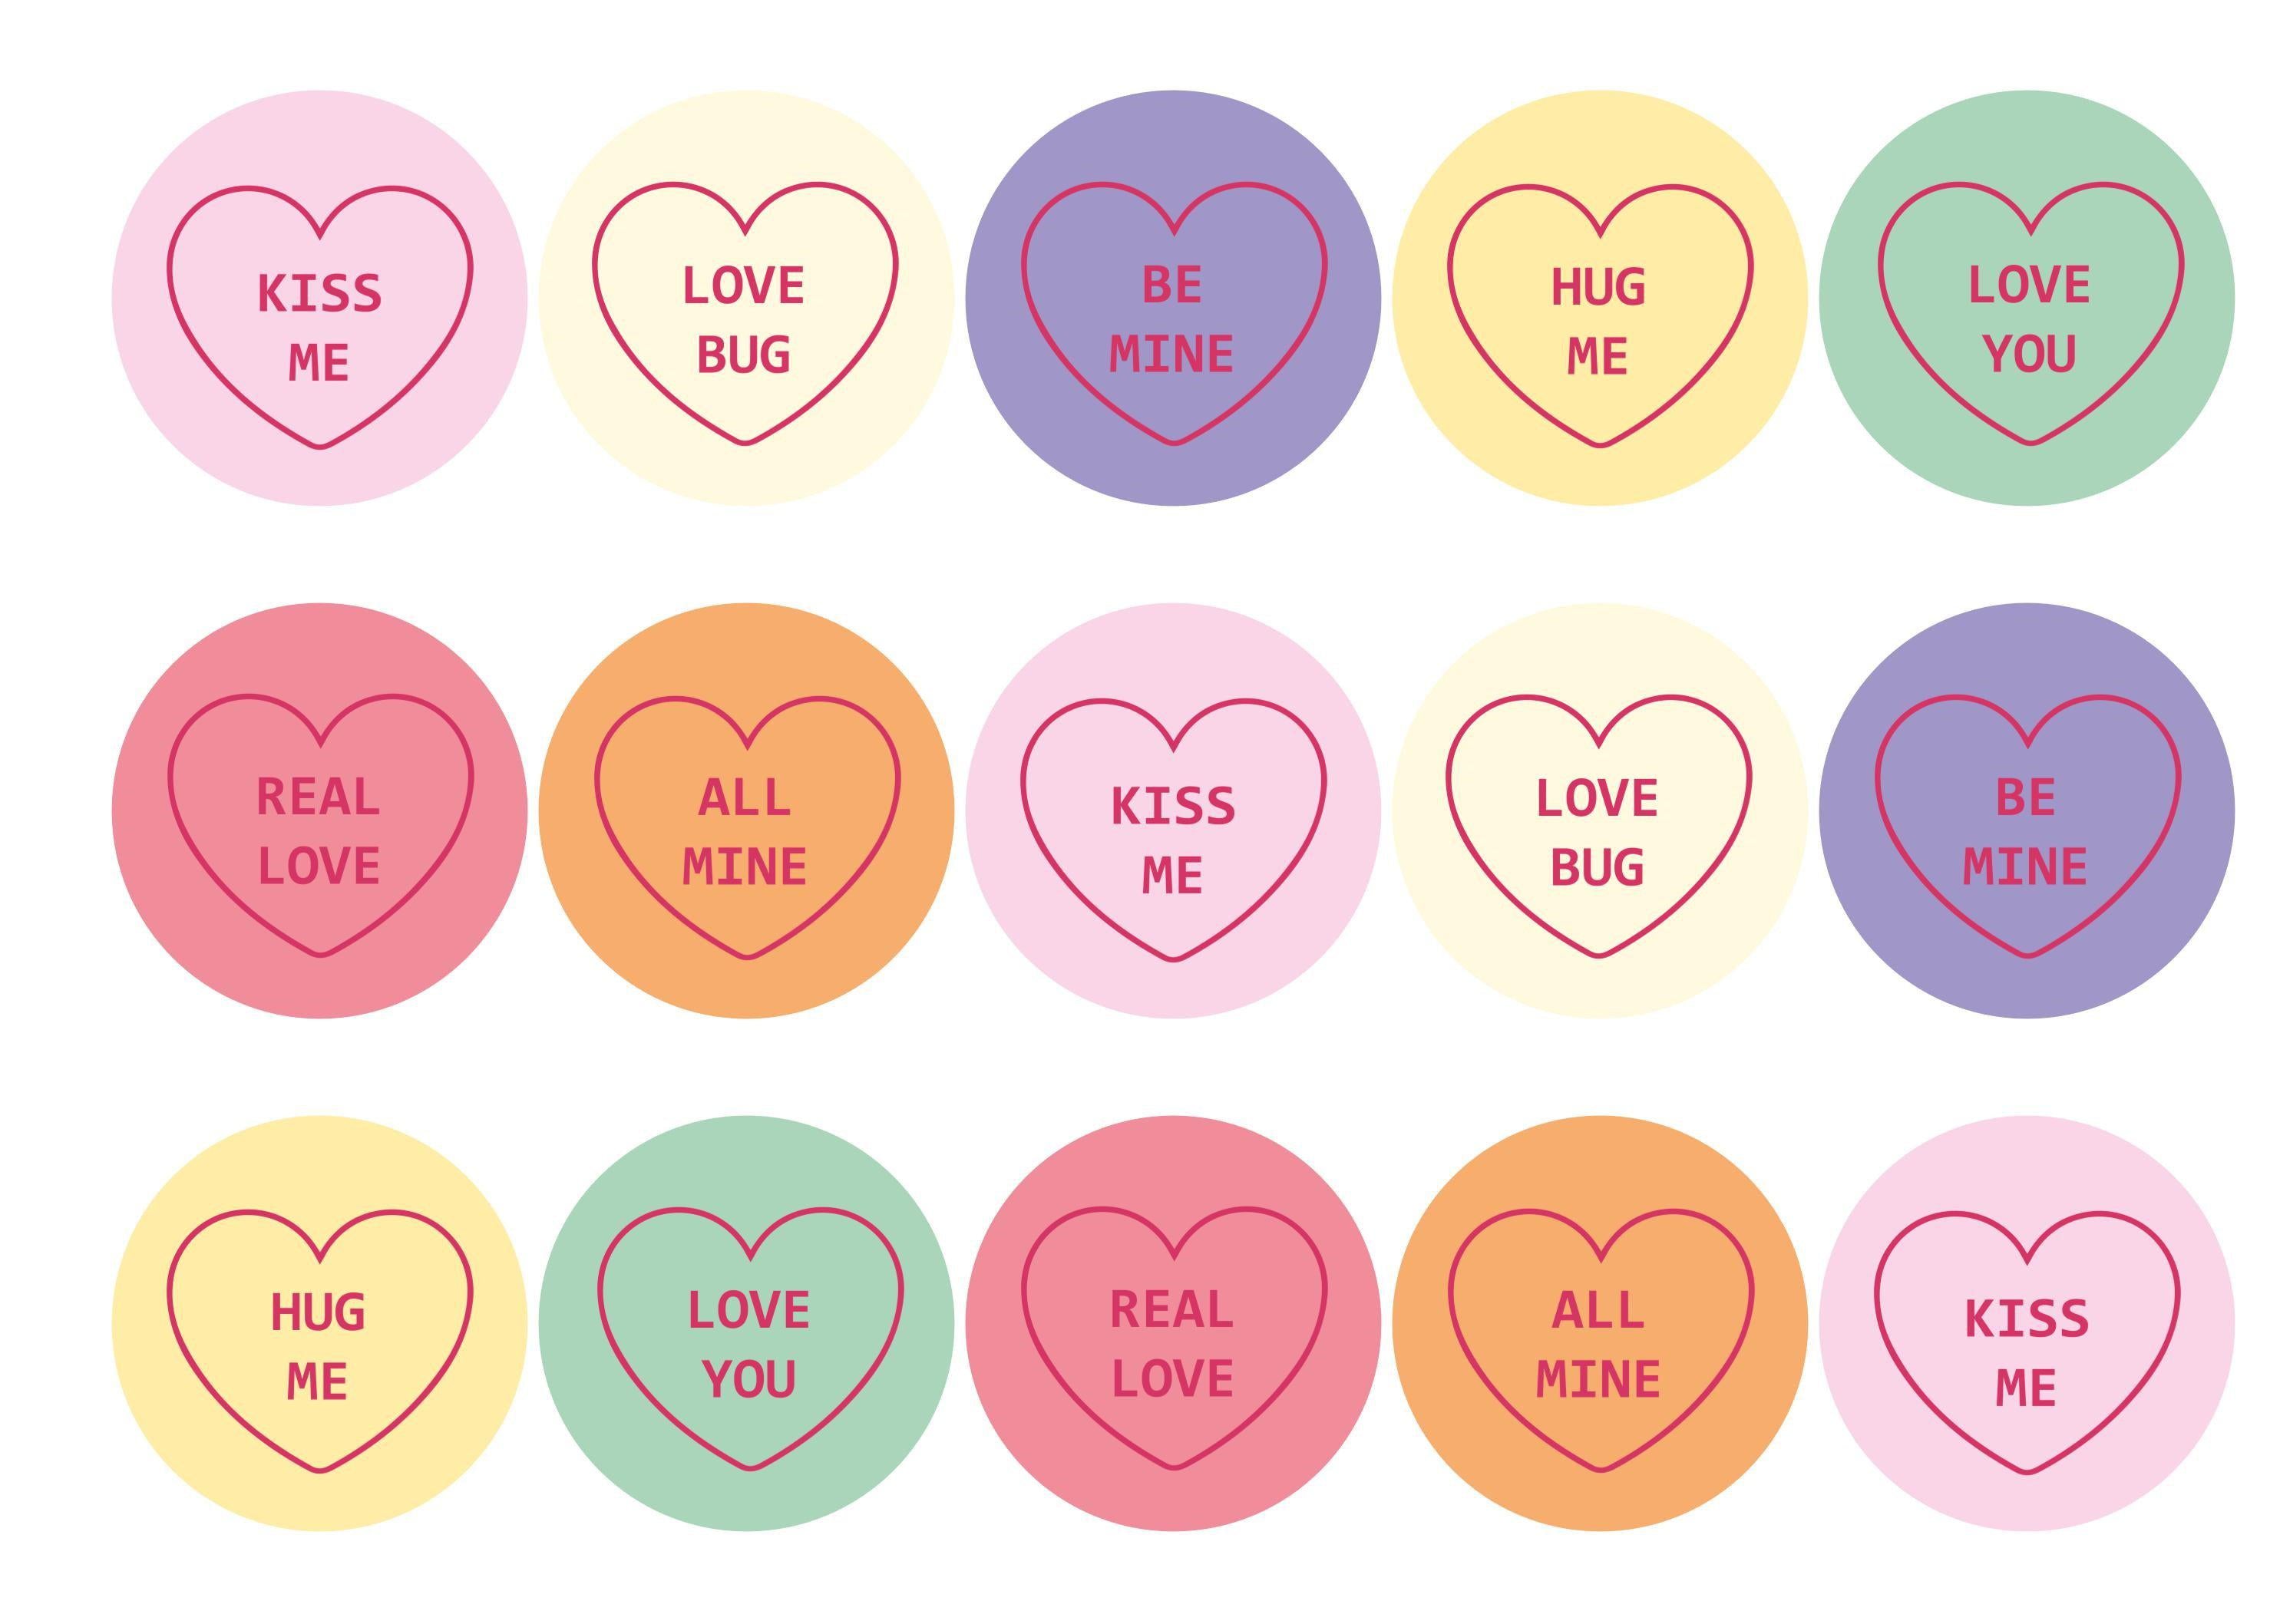 15 edible love heart valentines toppers